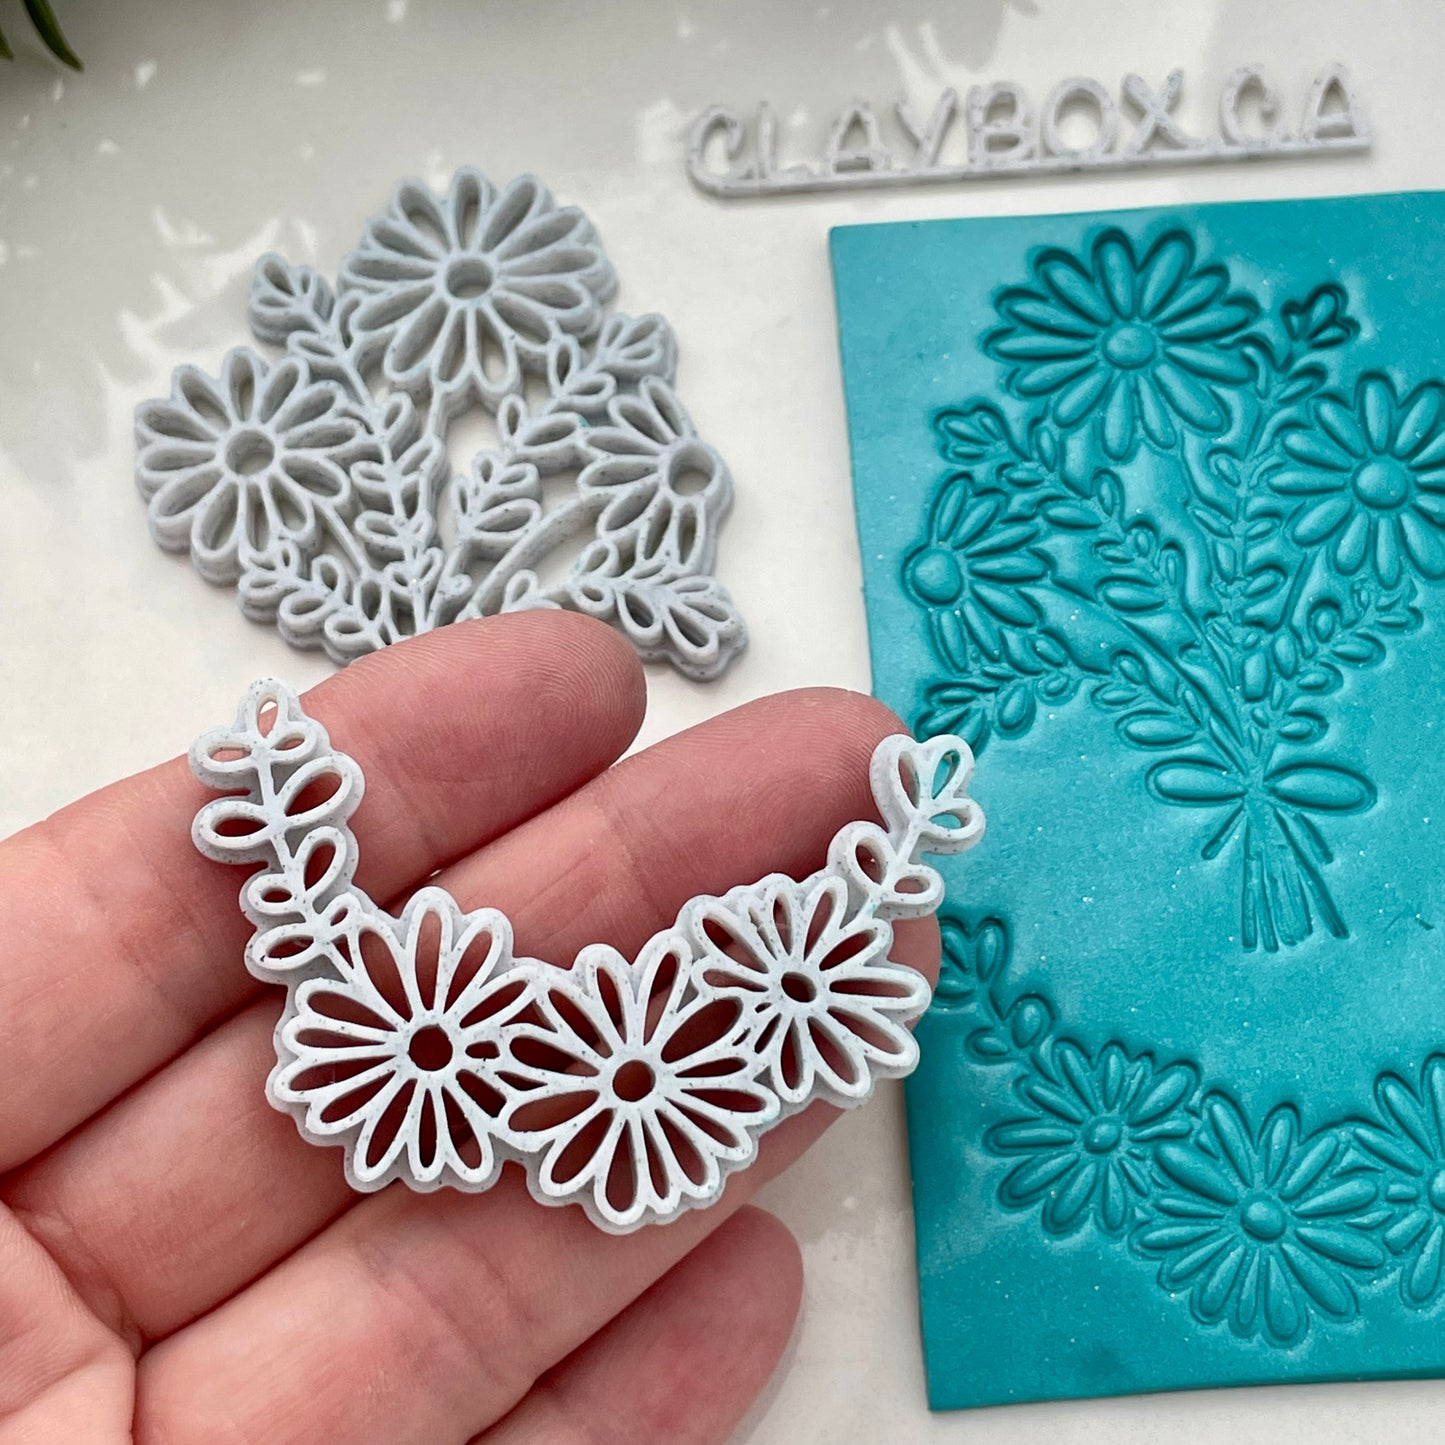 Chunky daisy stamps